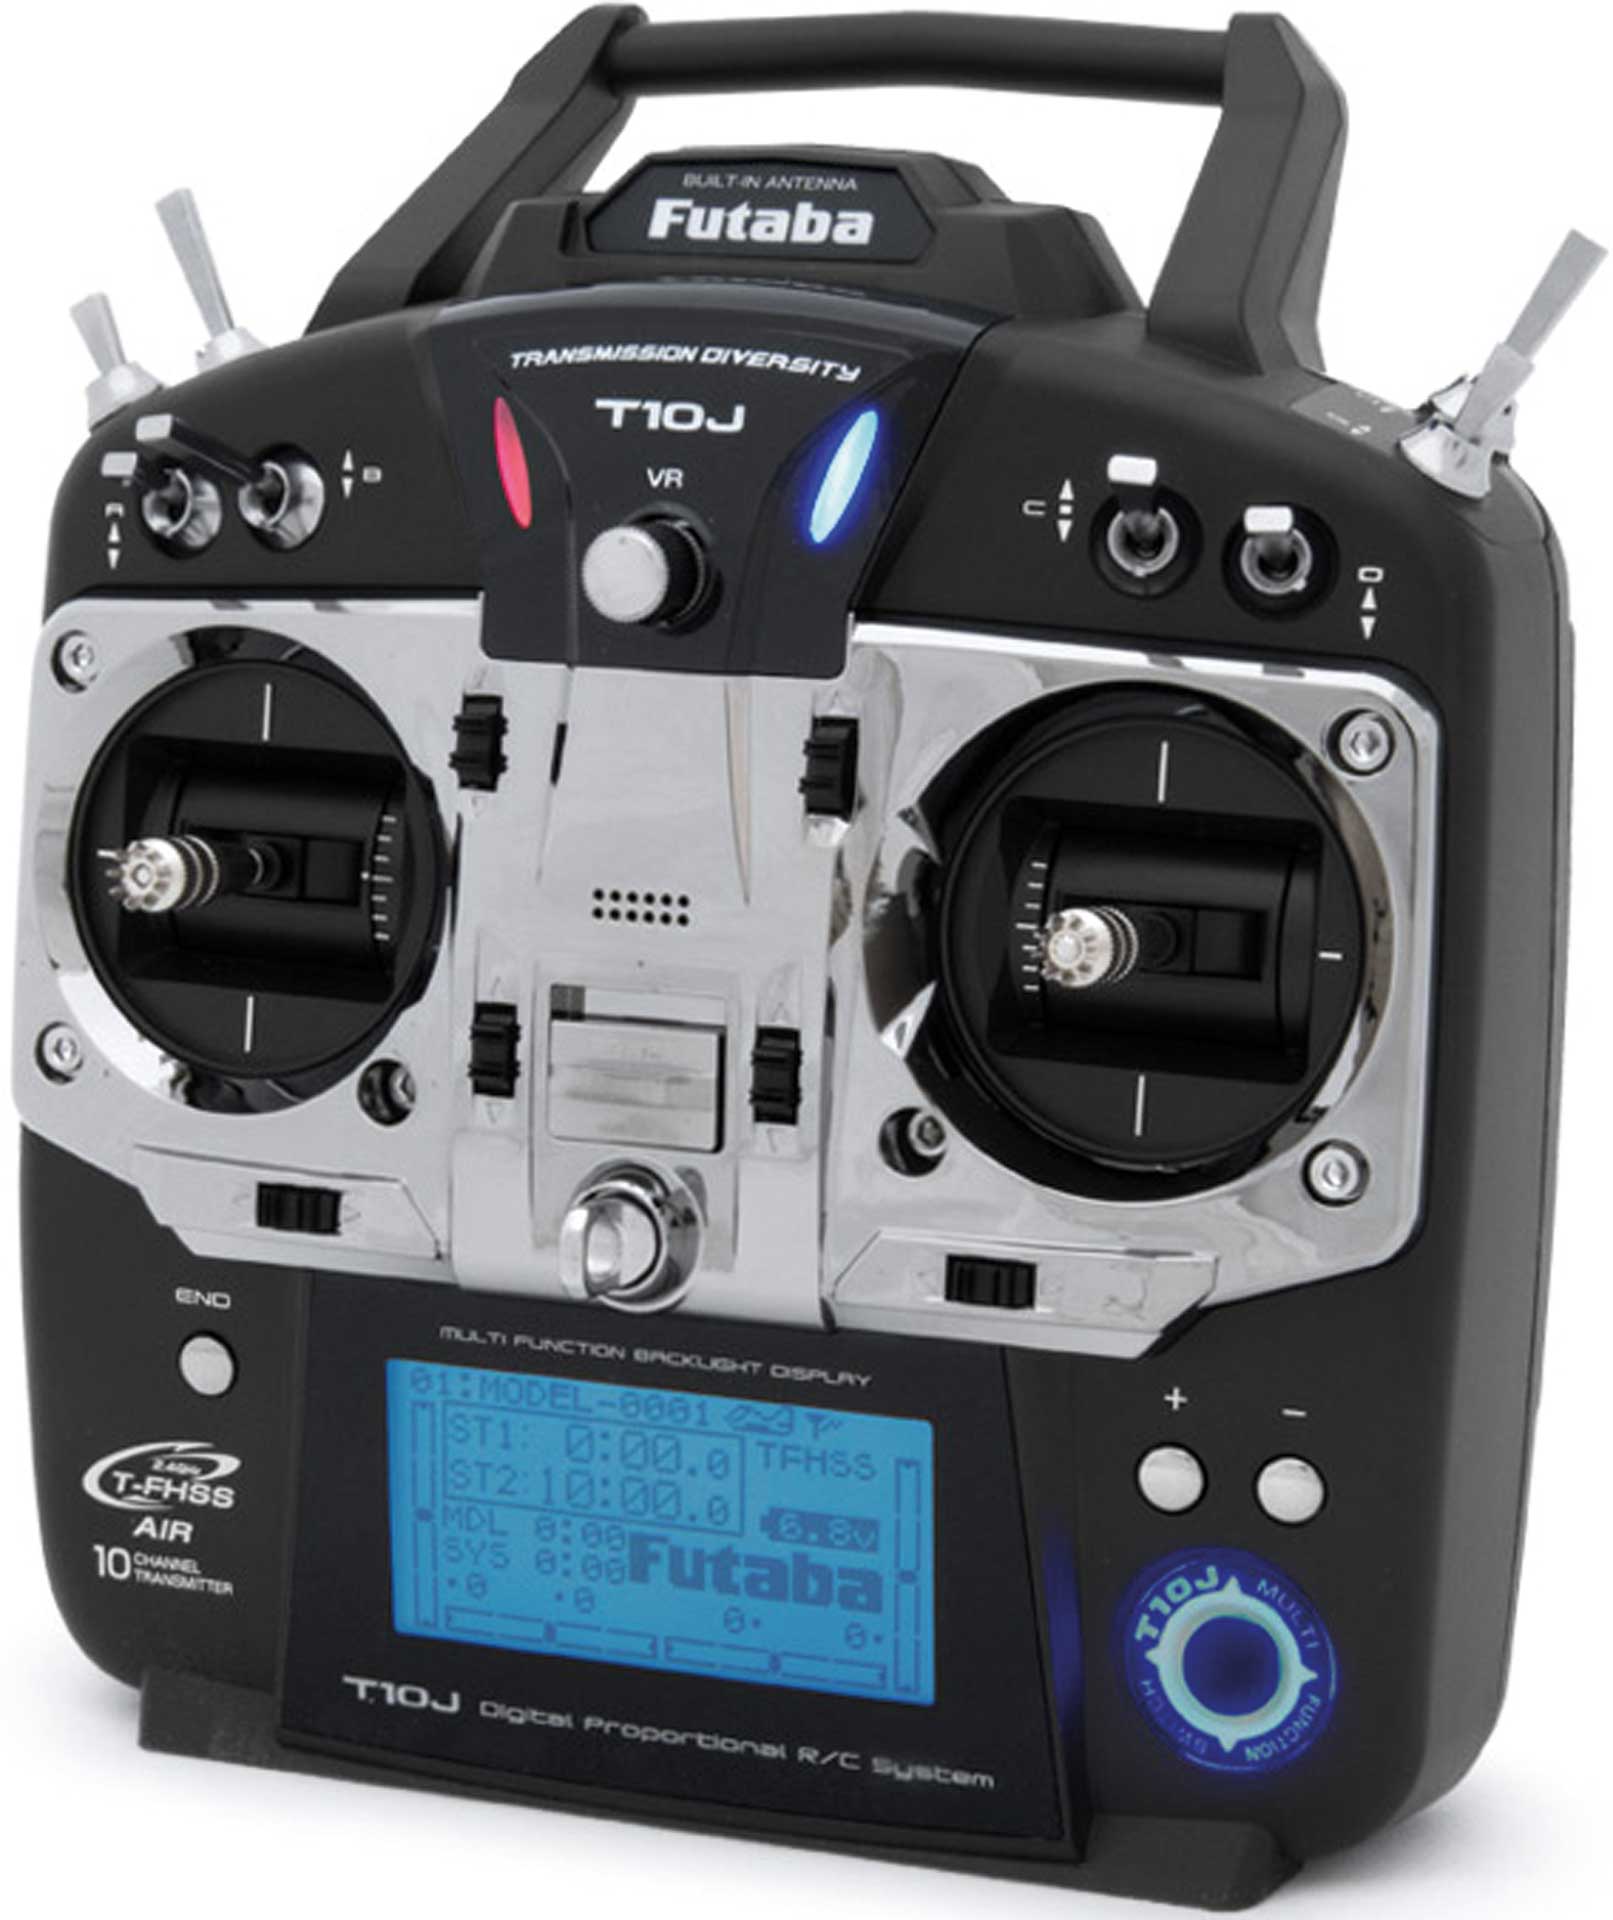 FUTABA T10J T-FHSS Mode 1 with R3008SB T-FHSS Air WITHOUT transmitter battery!